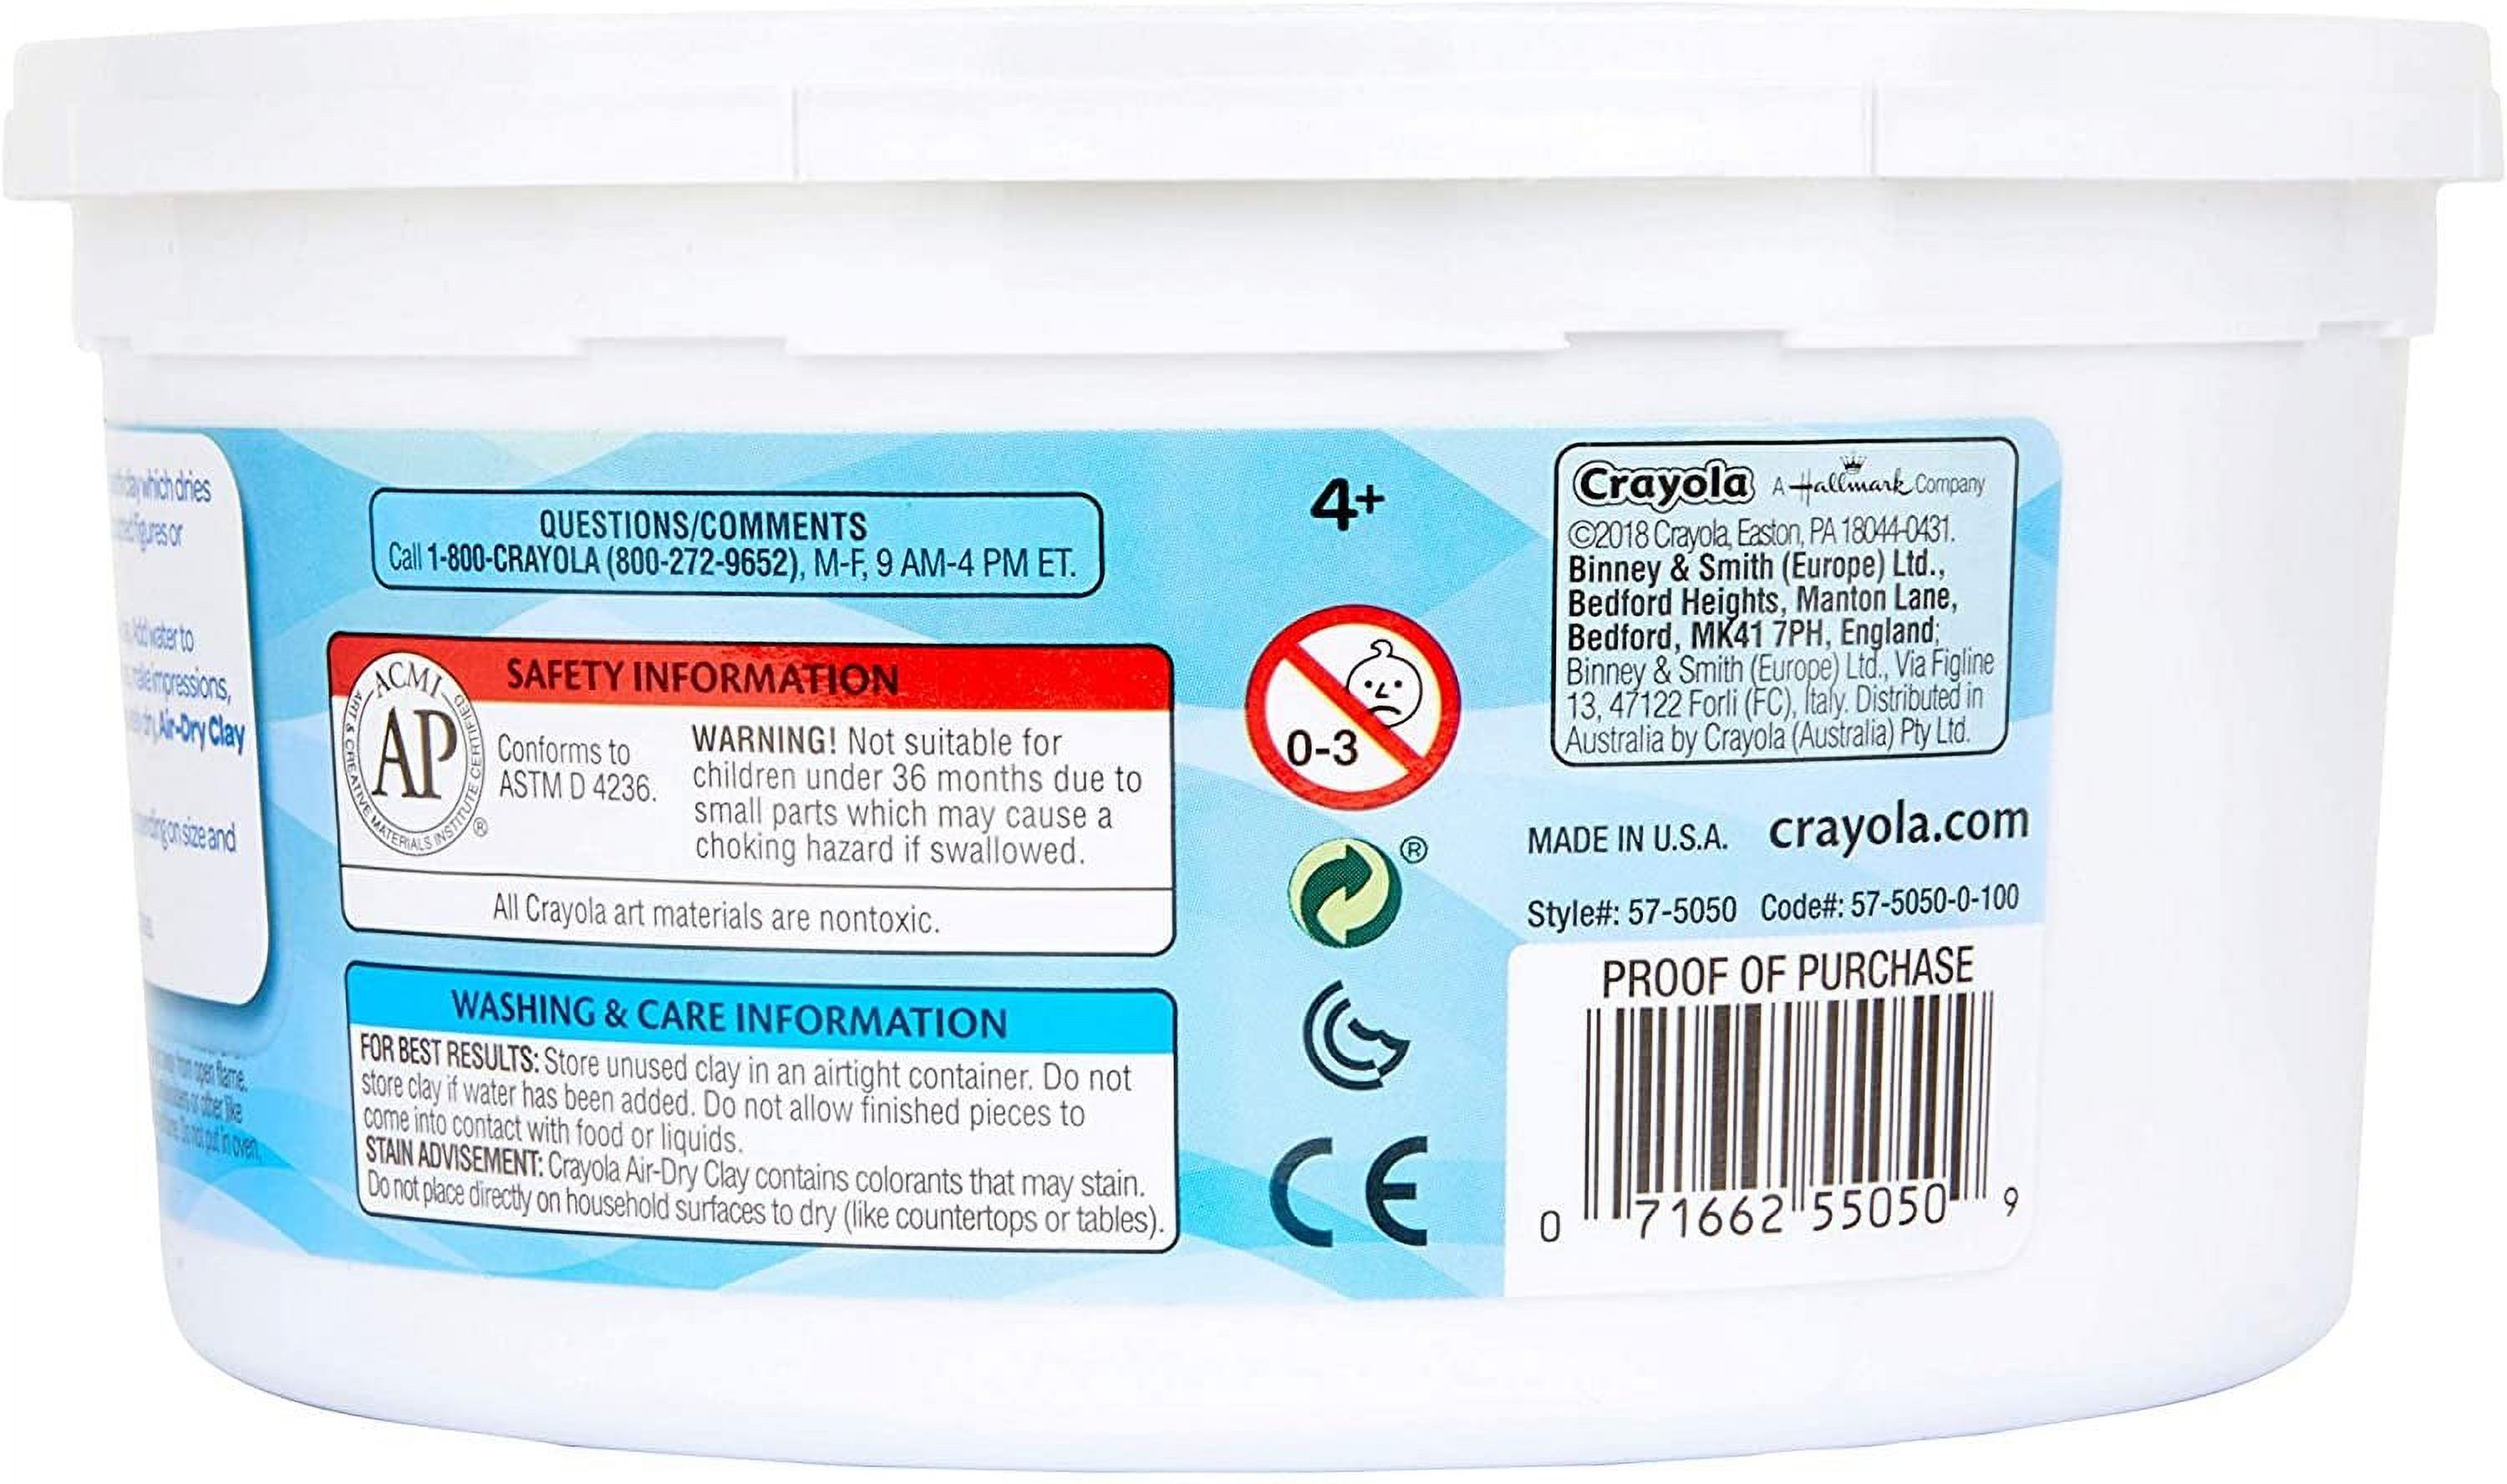 Crayola Air-Dry Clay, White, 2.5 Lb Resealable Bucket - image 3 of 11